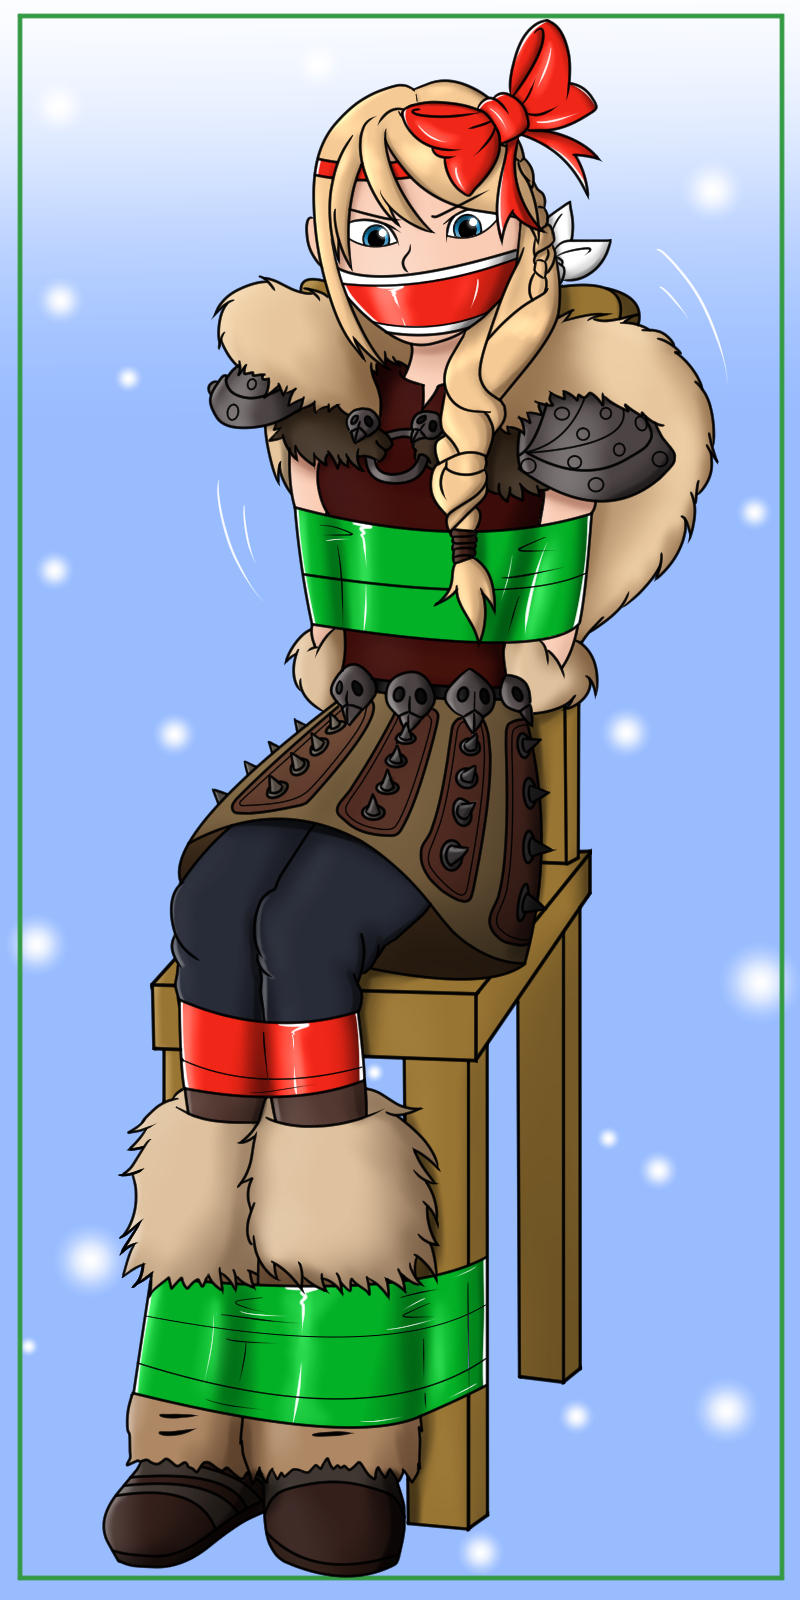 Astrid Gift Wrapped By DustnMud On DeviantArt.